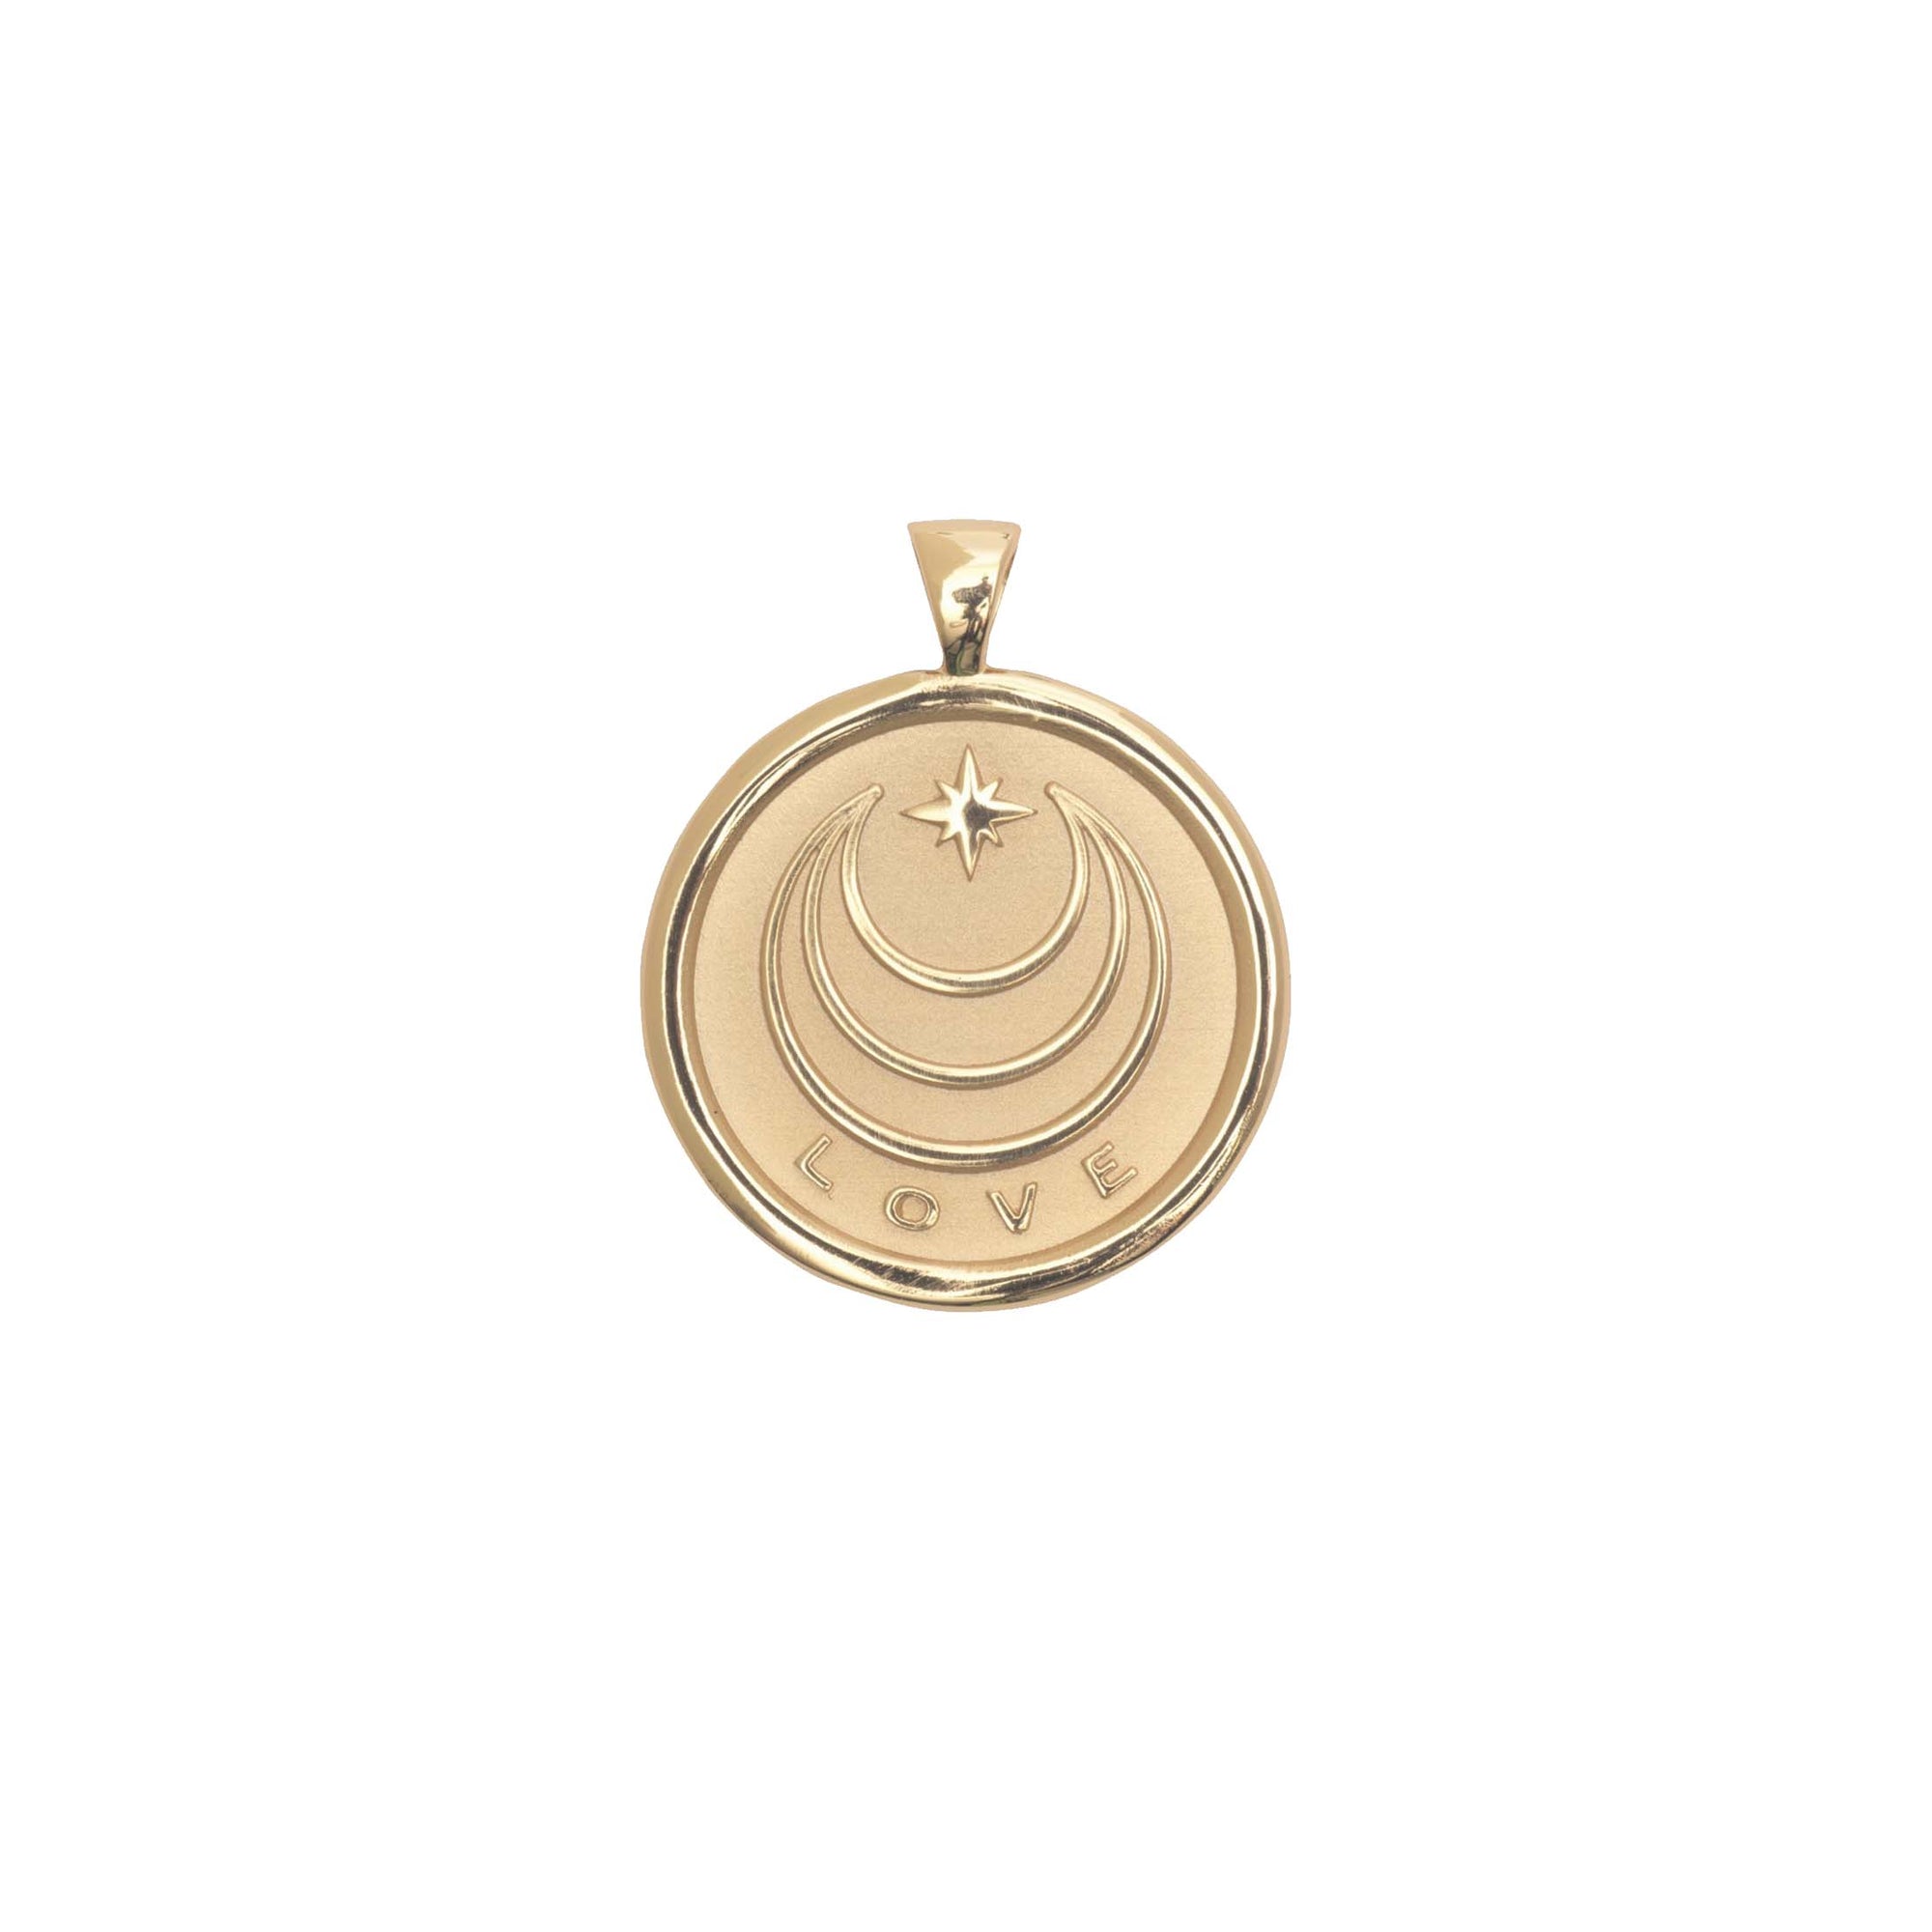 LOVE JW Small Pendant Coin in Solid Gold